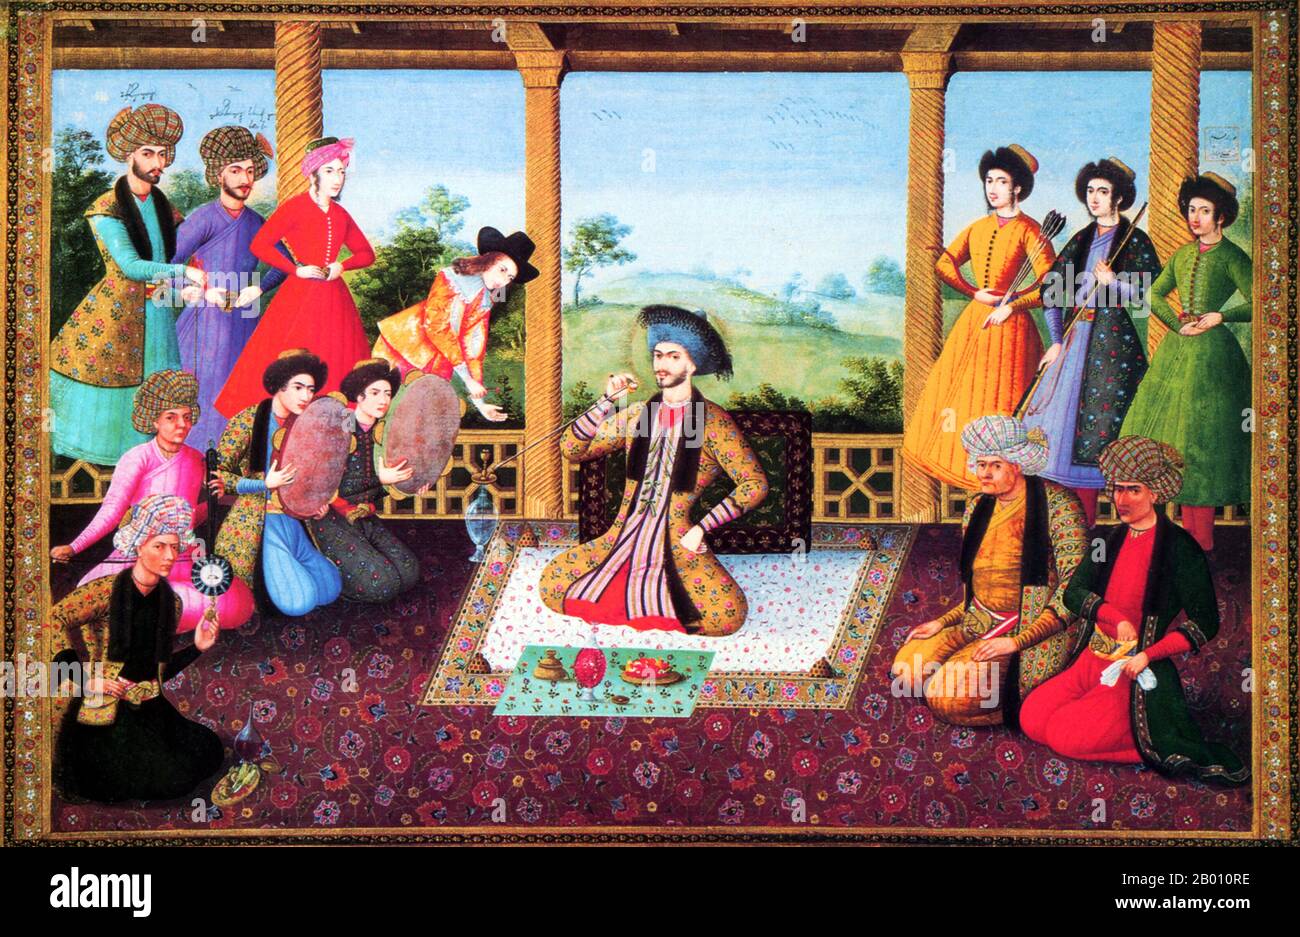 Iran: A painting by Ali-Quli Jabbadar (1666-1694) depicting a 17th-century royal garden pavilion scene from the court of the Safavid Shah Sulaiman.  The Safavids were one of the most significant ruling dynasties of Persia and established the Twelver school of Shi'a Islam as the official religion of their empire, marking one of the most important turning points in the history of Islam. This Shia dynasty was of mixed ancestry: Kurdish, Azerbaijani, Georgian and Greek, and ruled Iran from 1501 to 1722. Stock Photo